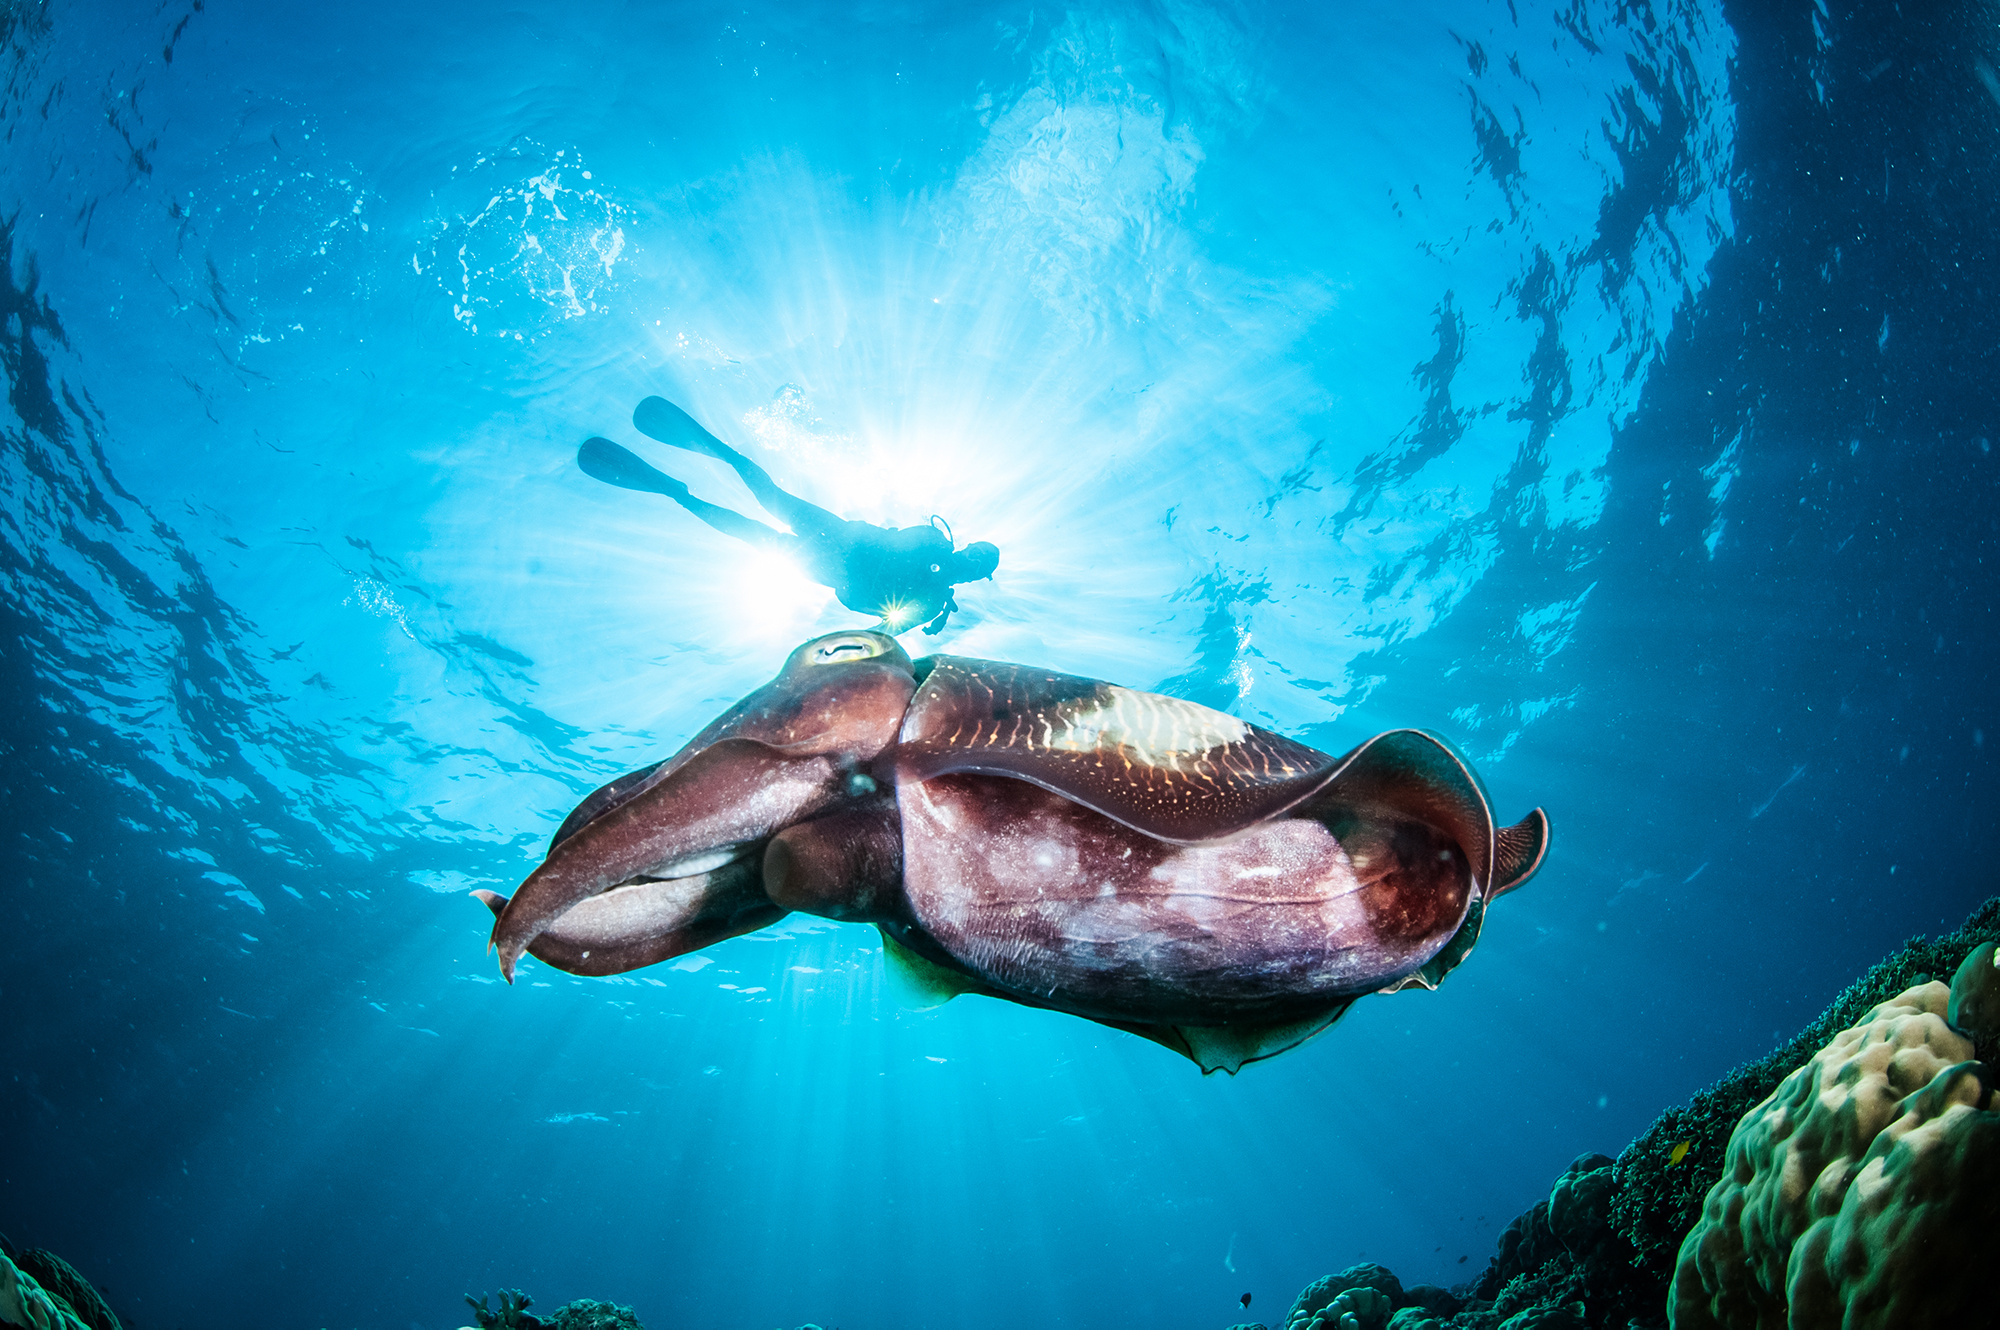 A cuttlefish showing off its flamboyant colors, patterns, and shapes, while a scuba diver observes from the surface